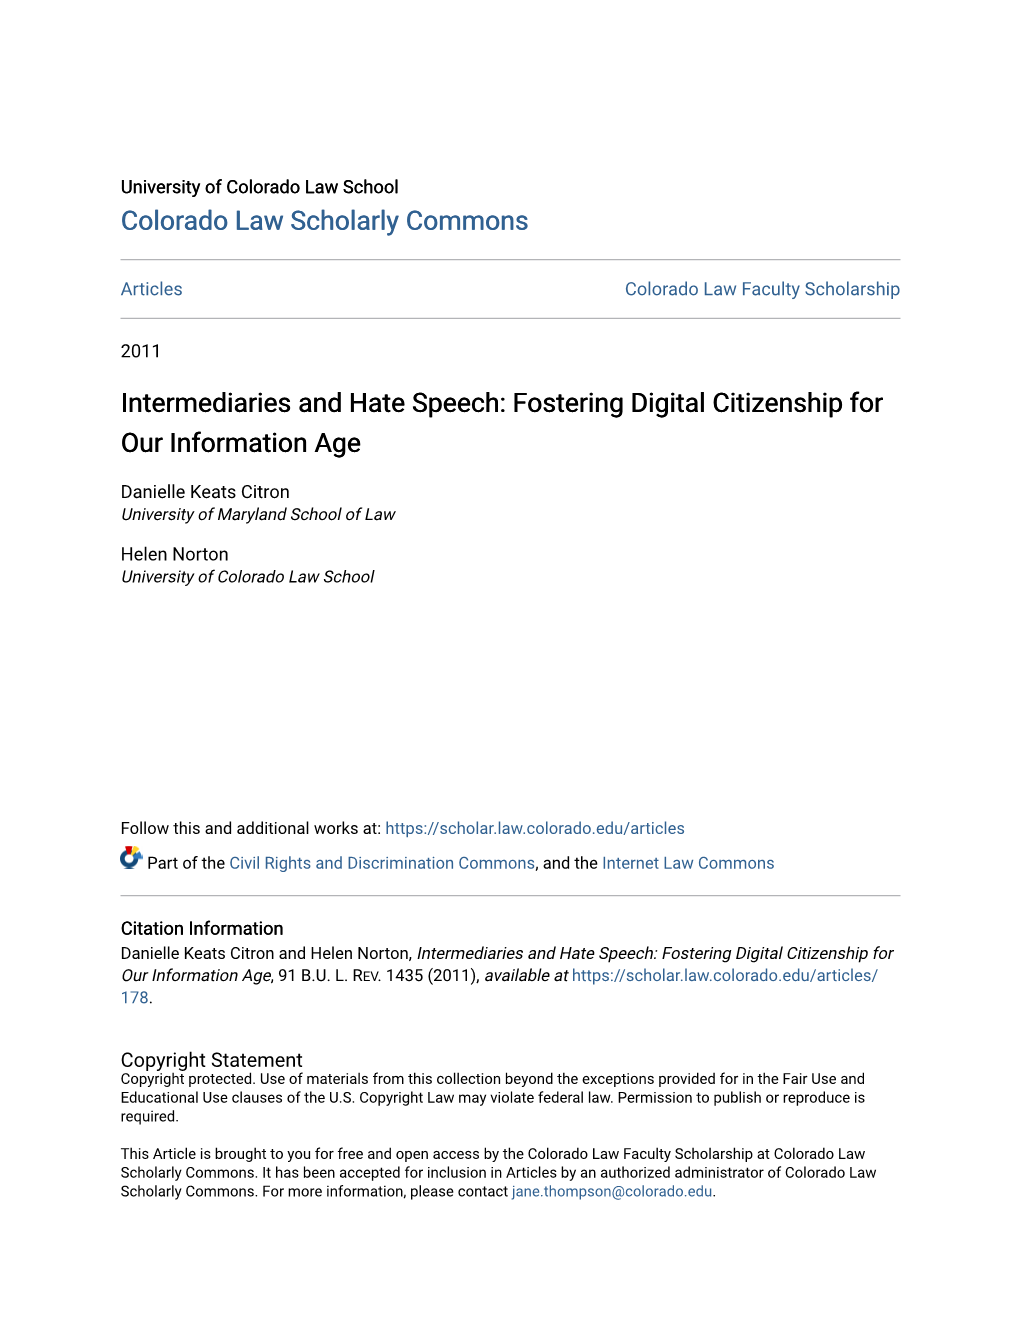 Intermediaries and Hate Speech: Fostering Digital Citizenship for Our Information Age